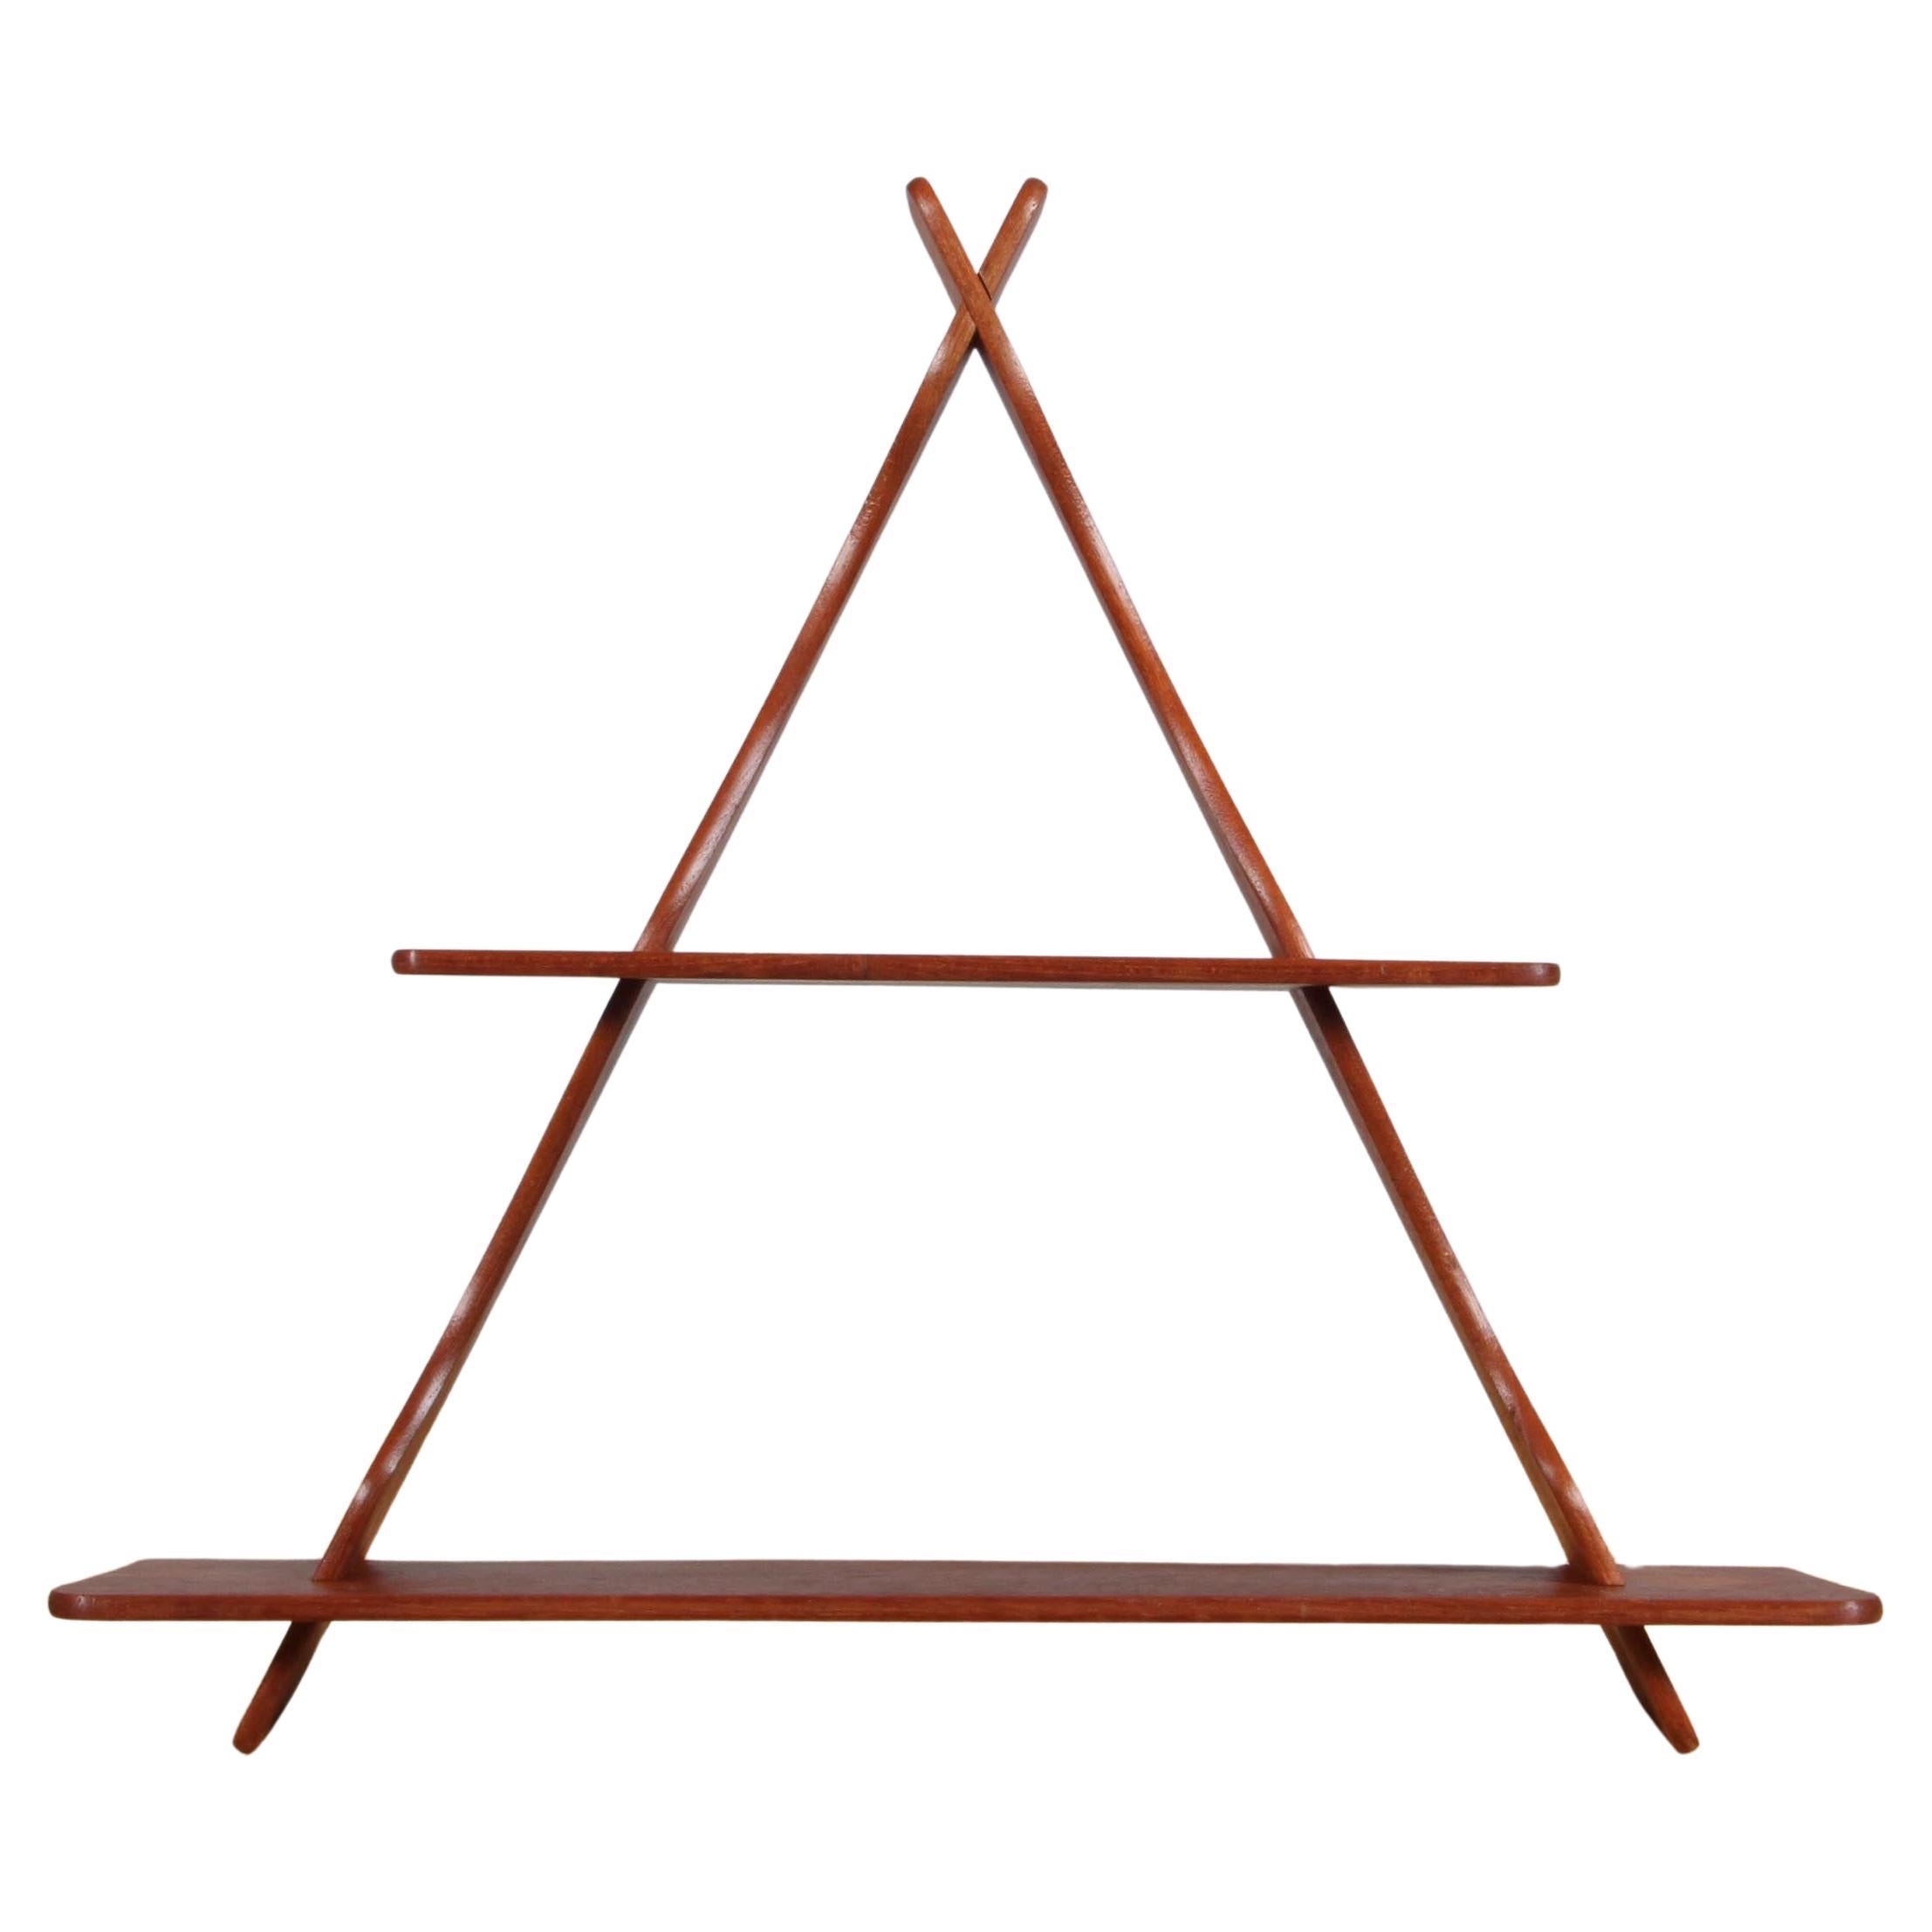 Triangular Wall Unit in Teak by Peder Moos and/or Apprentice of, 1950s